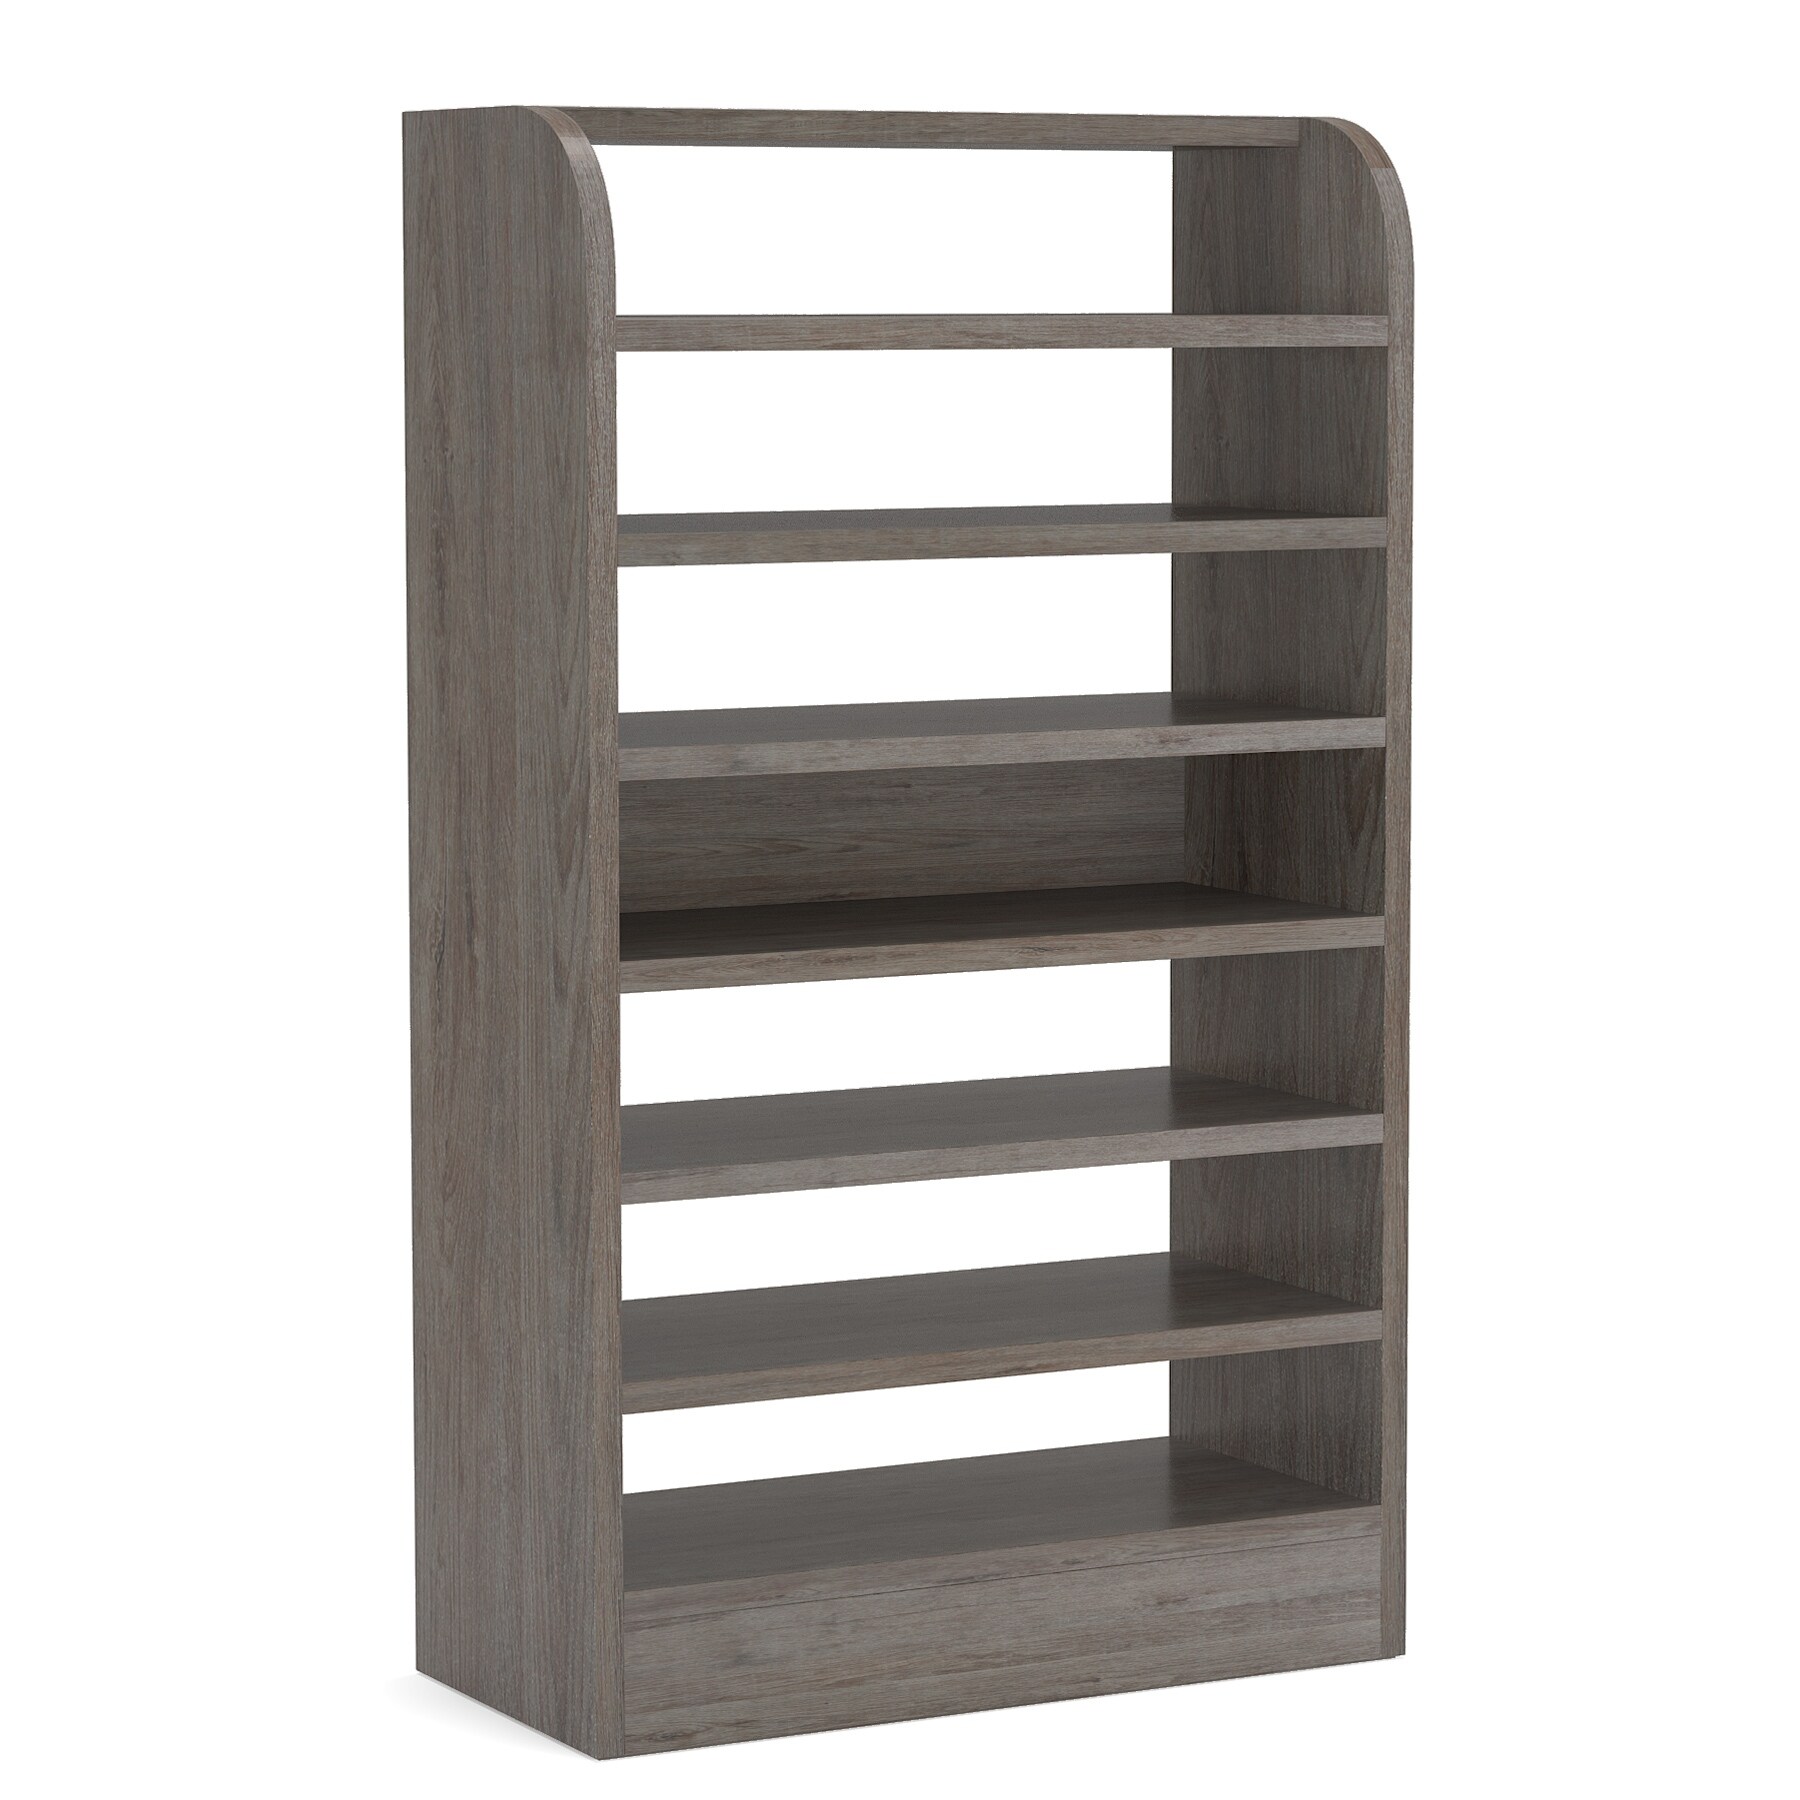 https://ak1.ostkcdn.com/images/products/is/images/direct/37b5570905144fbe0f5d72f44cced1a1c120afca/8-Tier-Shoe-Cabinet-for-Entryway%2C-Modern-White-Shoe-Shelf-Shoes-Rack-Organizer%2C-Wooden-Shoe-Storage-Cabinet-for-Hallway-Closet.jpg